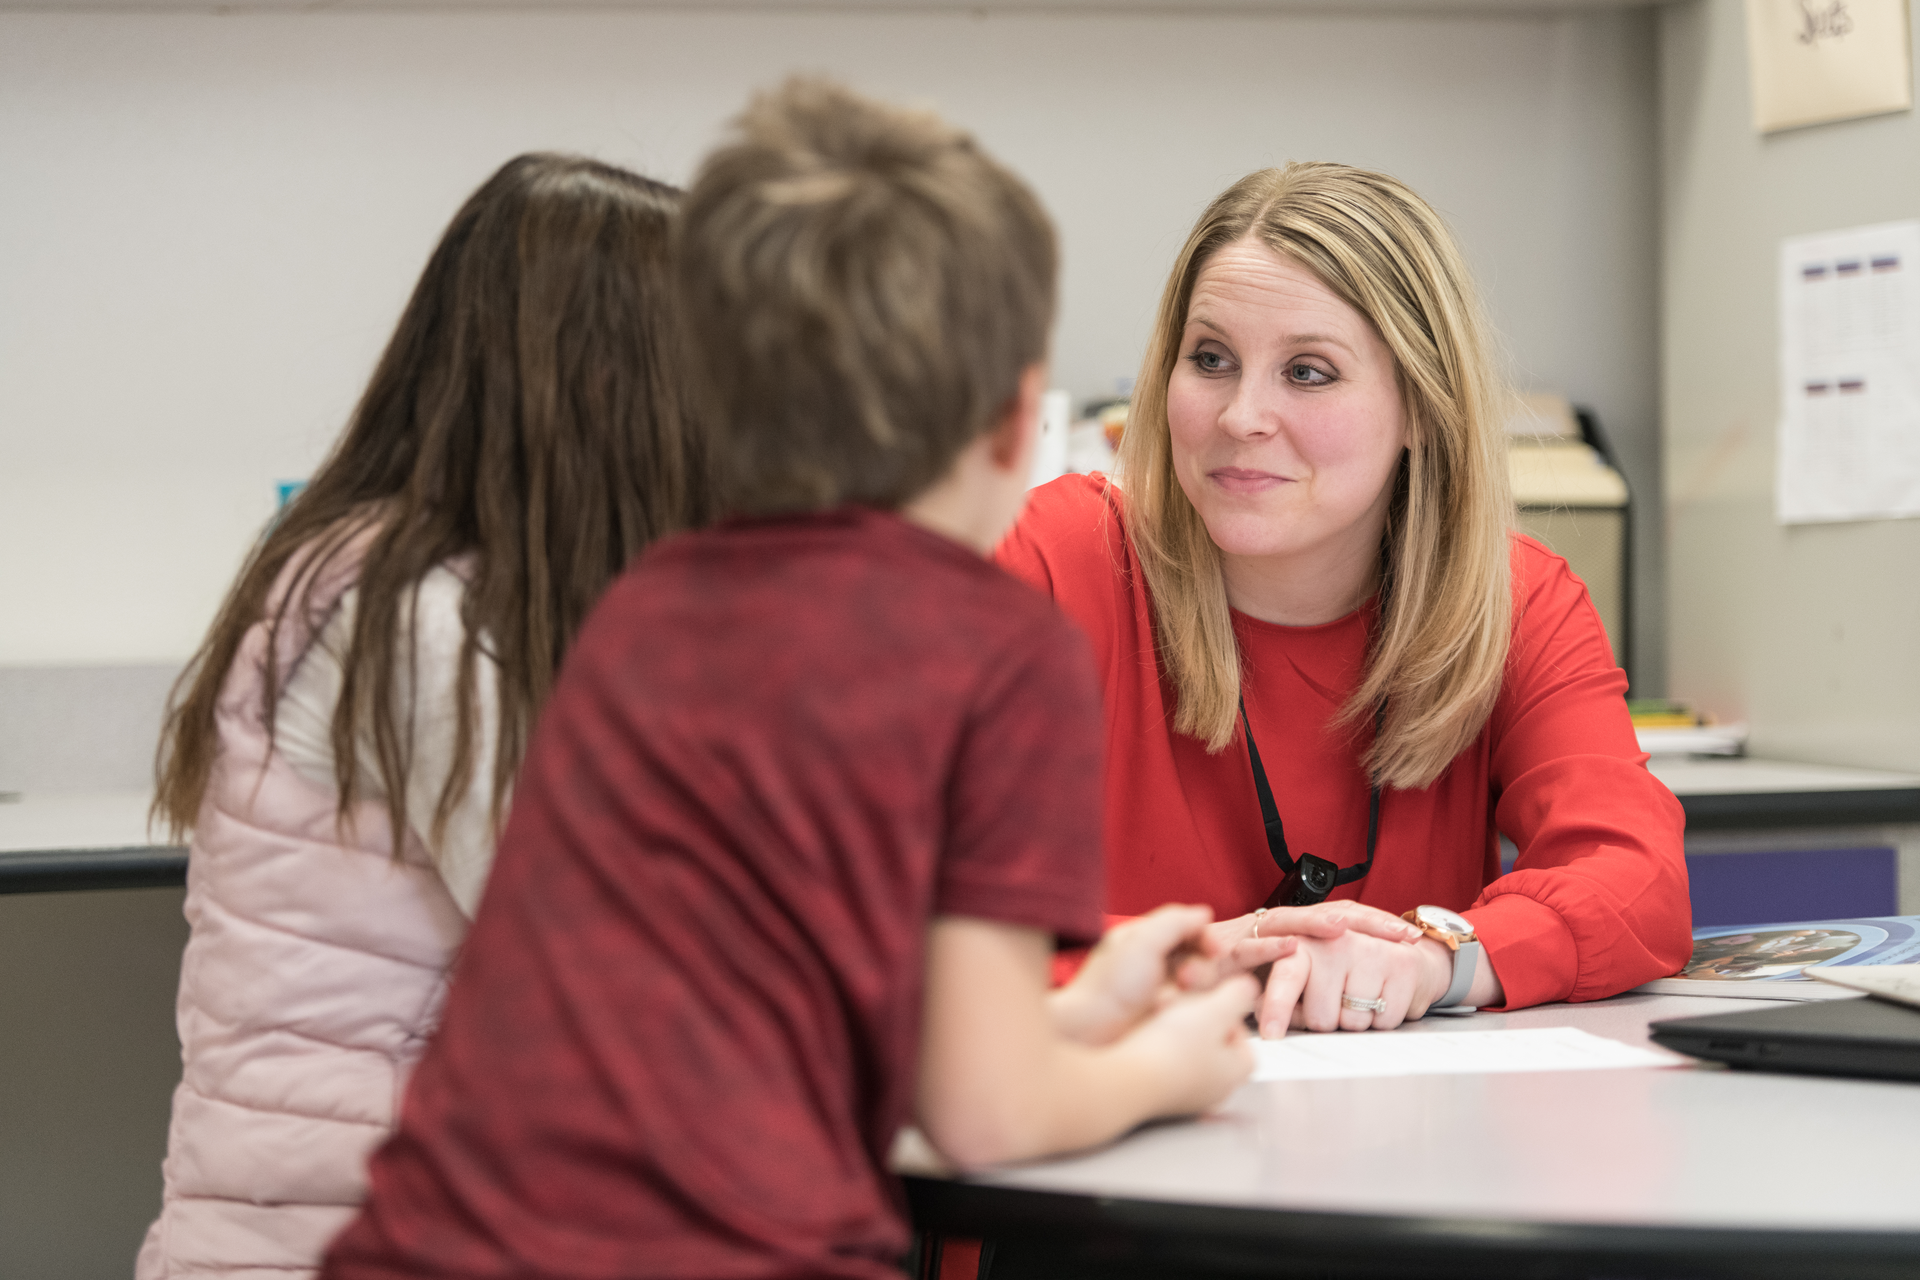 Blonde woman talks with two elementary age students in a classroom setting.